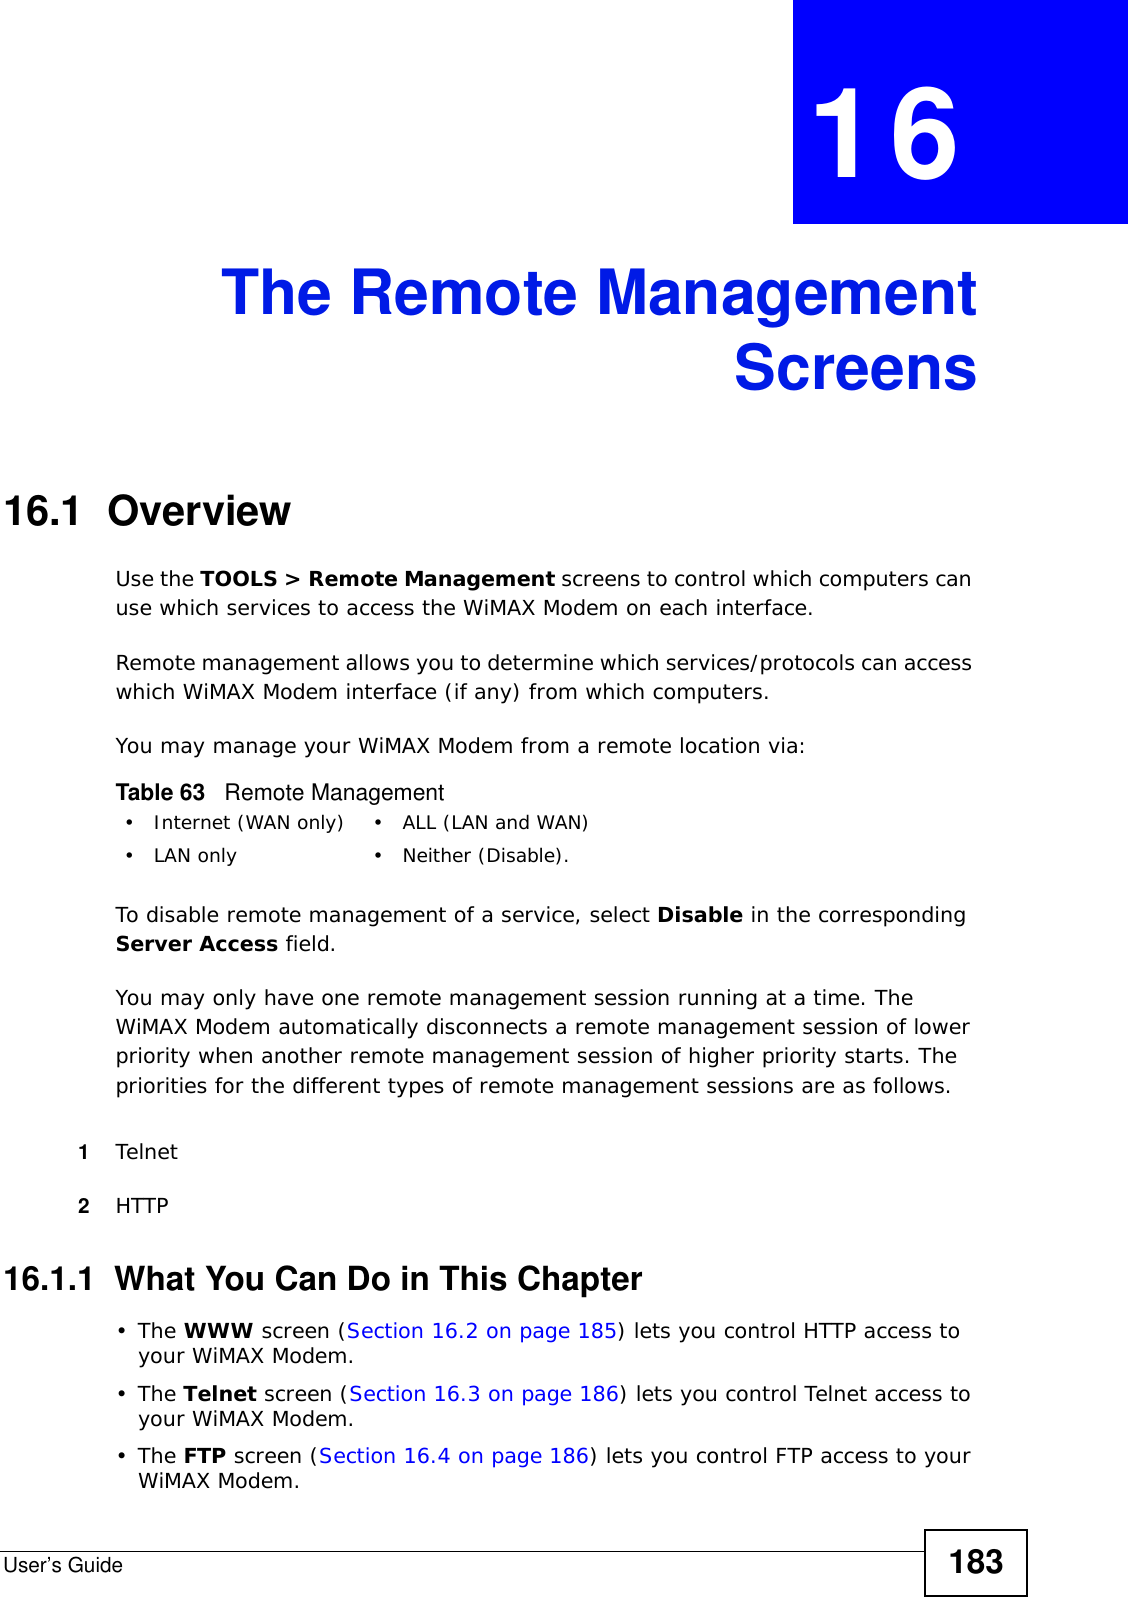 User’s Guide 183CHAPTER  16 The Remote ManagementScreens16.1  OverviewUse the TOOLS &gt; Remote Management screens to control which computers can use which services to access the WiMAX Modem on each interface.Remote management allows you to determine which services/protocols can access which WiMAX Modem interface (if any) from which computers.You may manage your WiMAX Modem from a remote location via:To disable remote management of a service, select Disable in the corresponding Server Access field.You may only have one remote management session running at a time. The WiMAX Modem automatically disconnects a remote management session of lower priority when another remote management session of higher priority starts. The priorities for the different types of remote management sessions are as follows.1Telnet2HTTP16.1.1  What You Can Do in This Chapter•The WWW screen (Section 16.2 on page 185) lets you control HTTP access to your WiMAX Modem.•The Telnet screen (Section 16.3 on page 186) lets you control Telnet access to your WiMAX Modem.•The FTP screen (Section 16.4 on page 186) lets you control FTP access to your WiMAX Modem.Table 63   Remote Management• Internet (WAN only) • ALL (LAN and WAN)• LAN only • Neither (Disable).